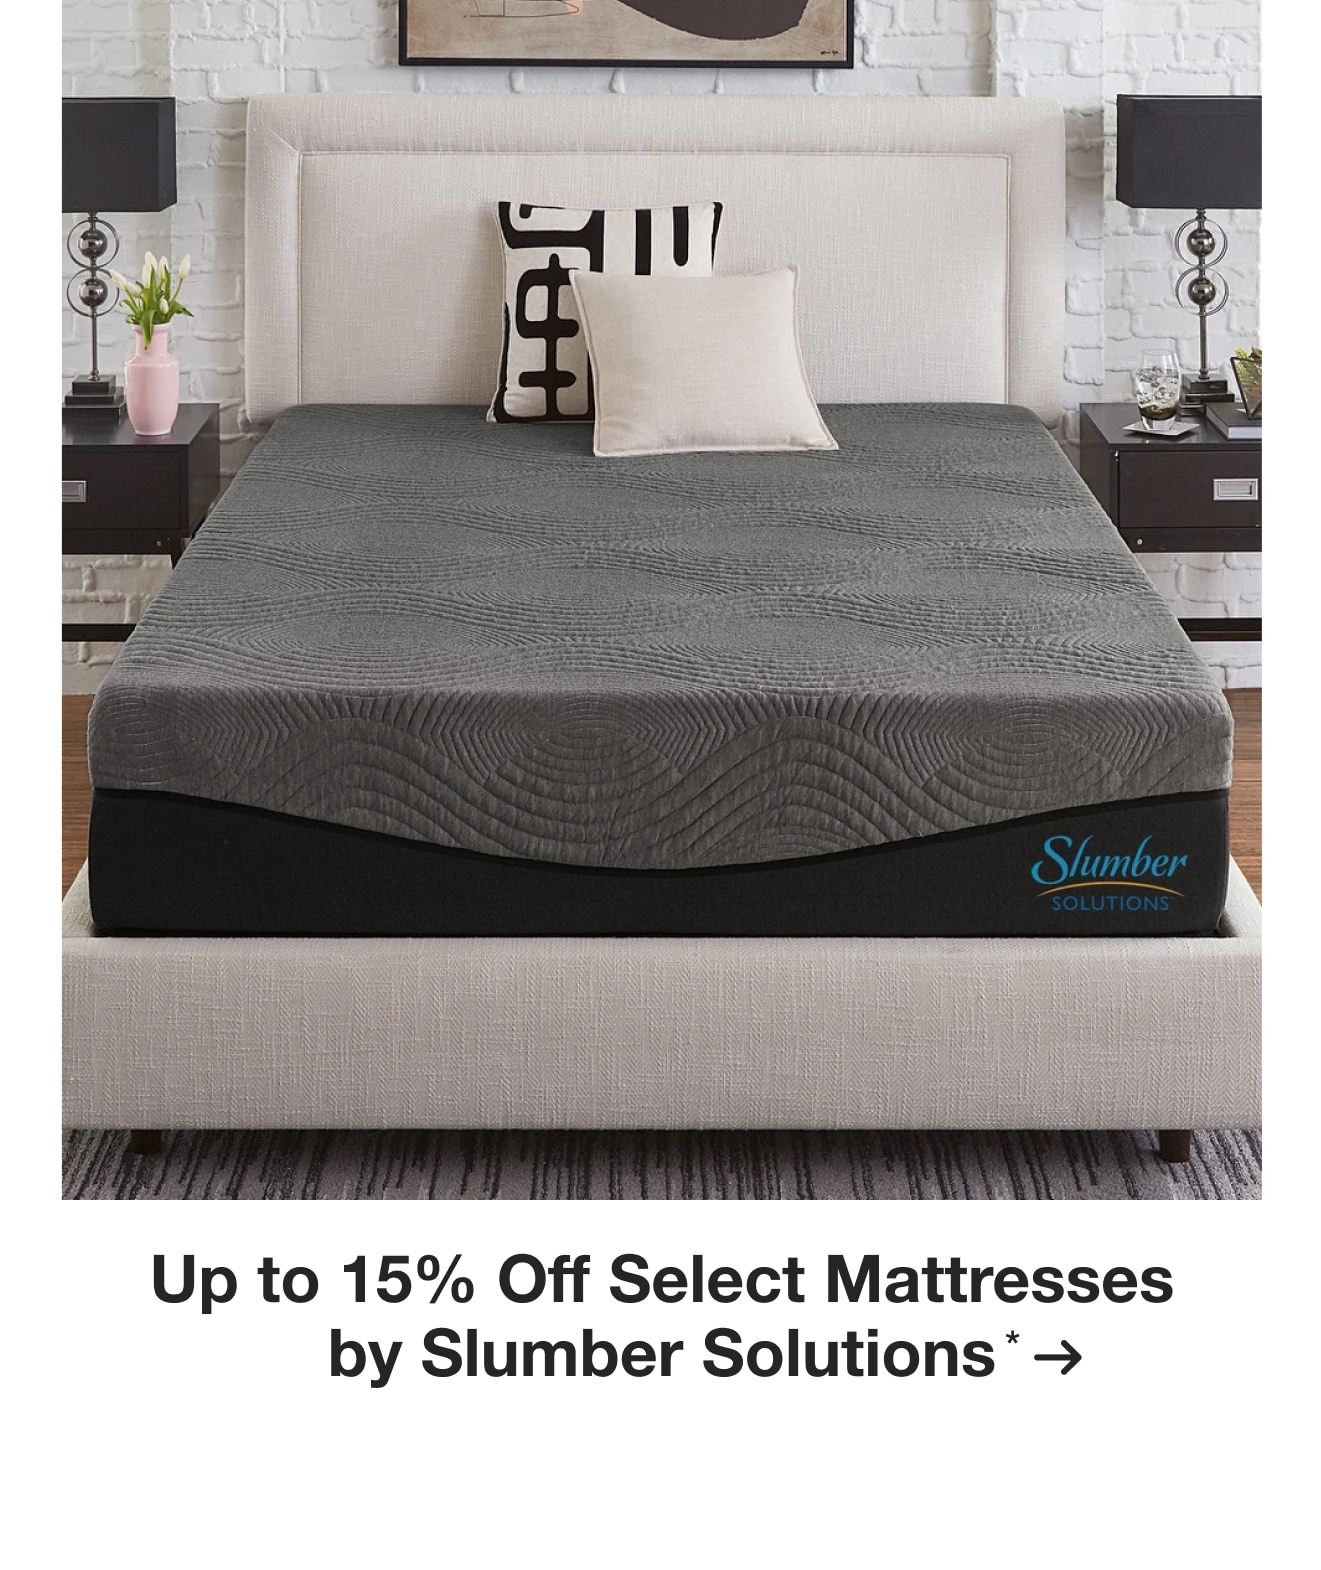 Up to 15% Offf Select Mattresses by Slumber Solutions*